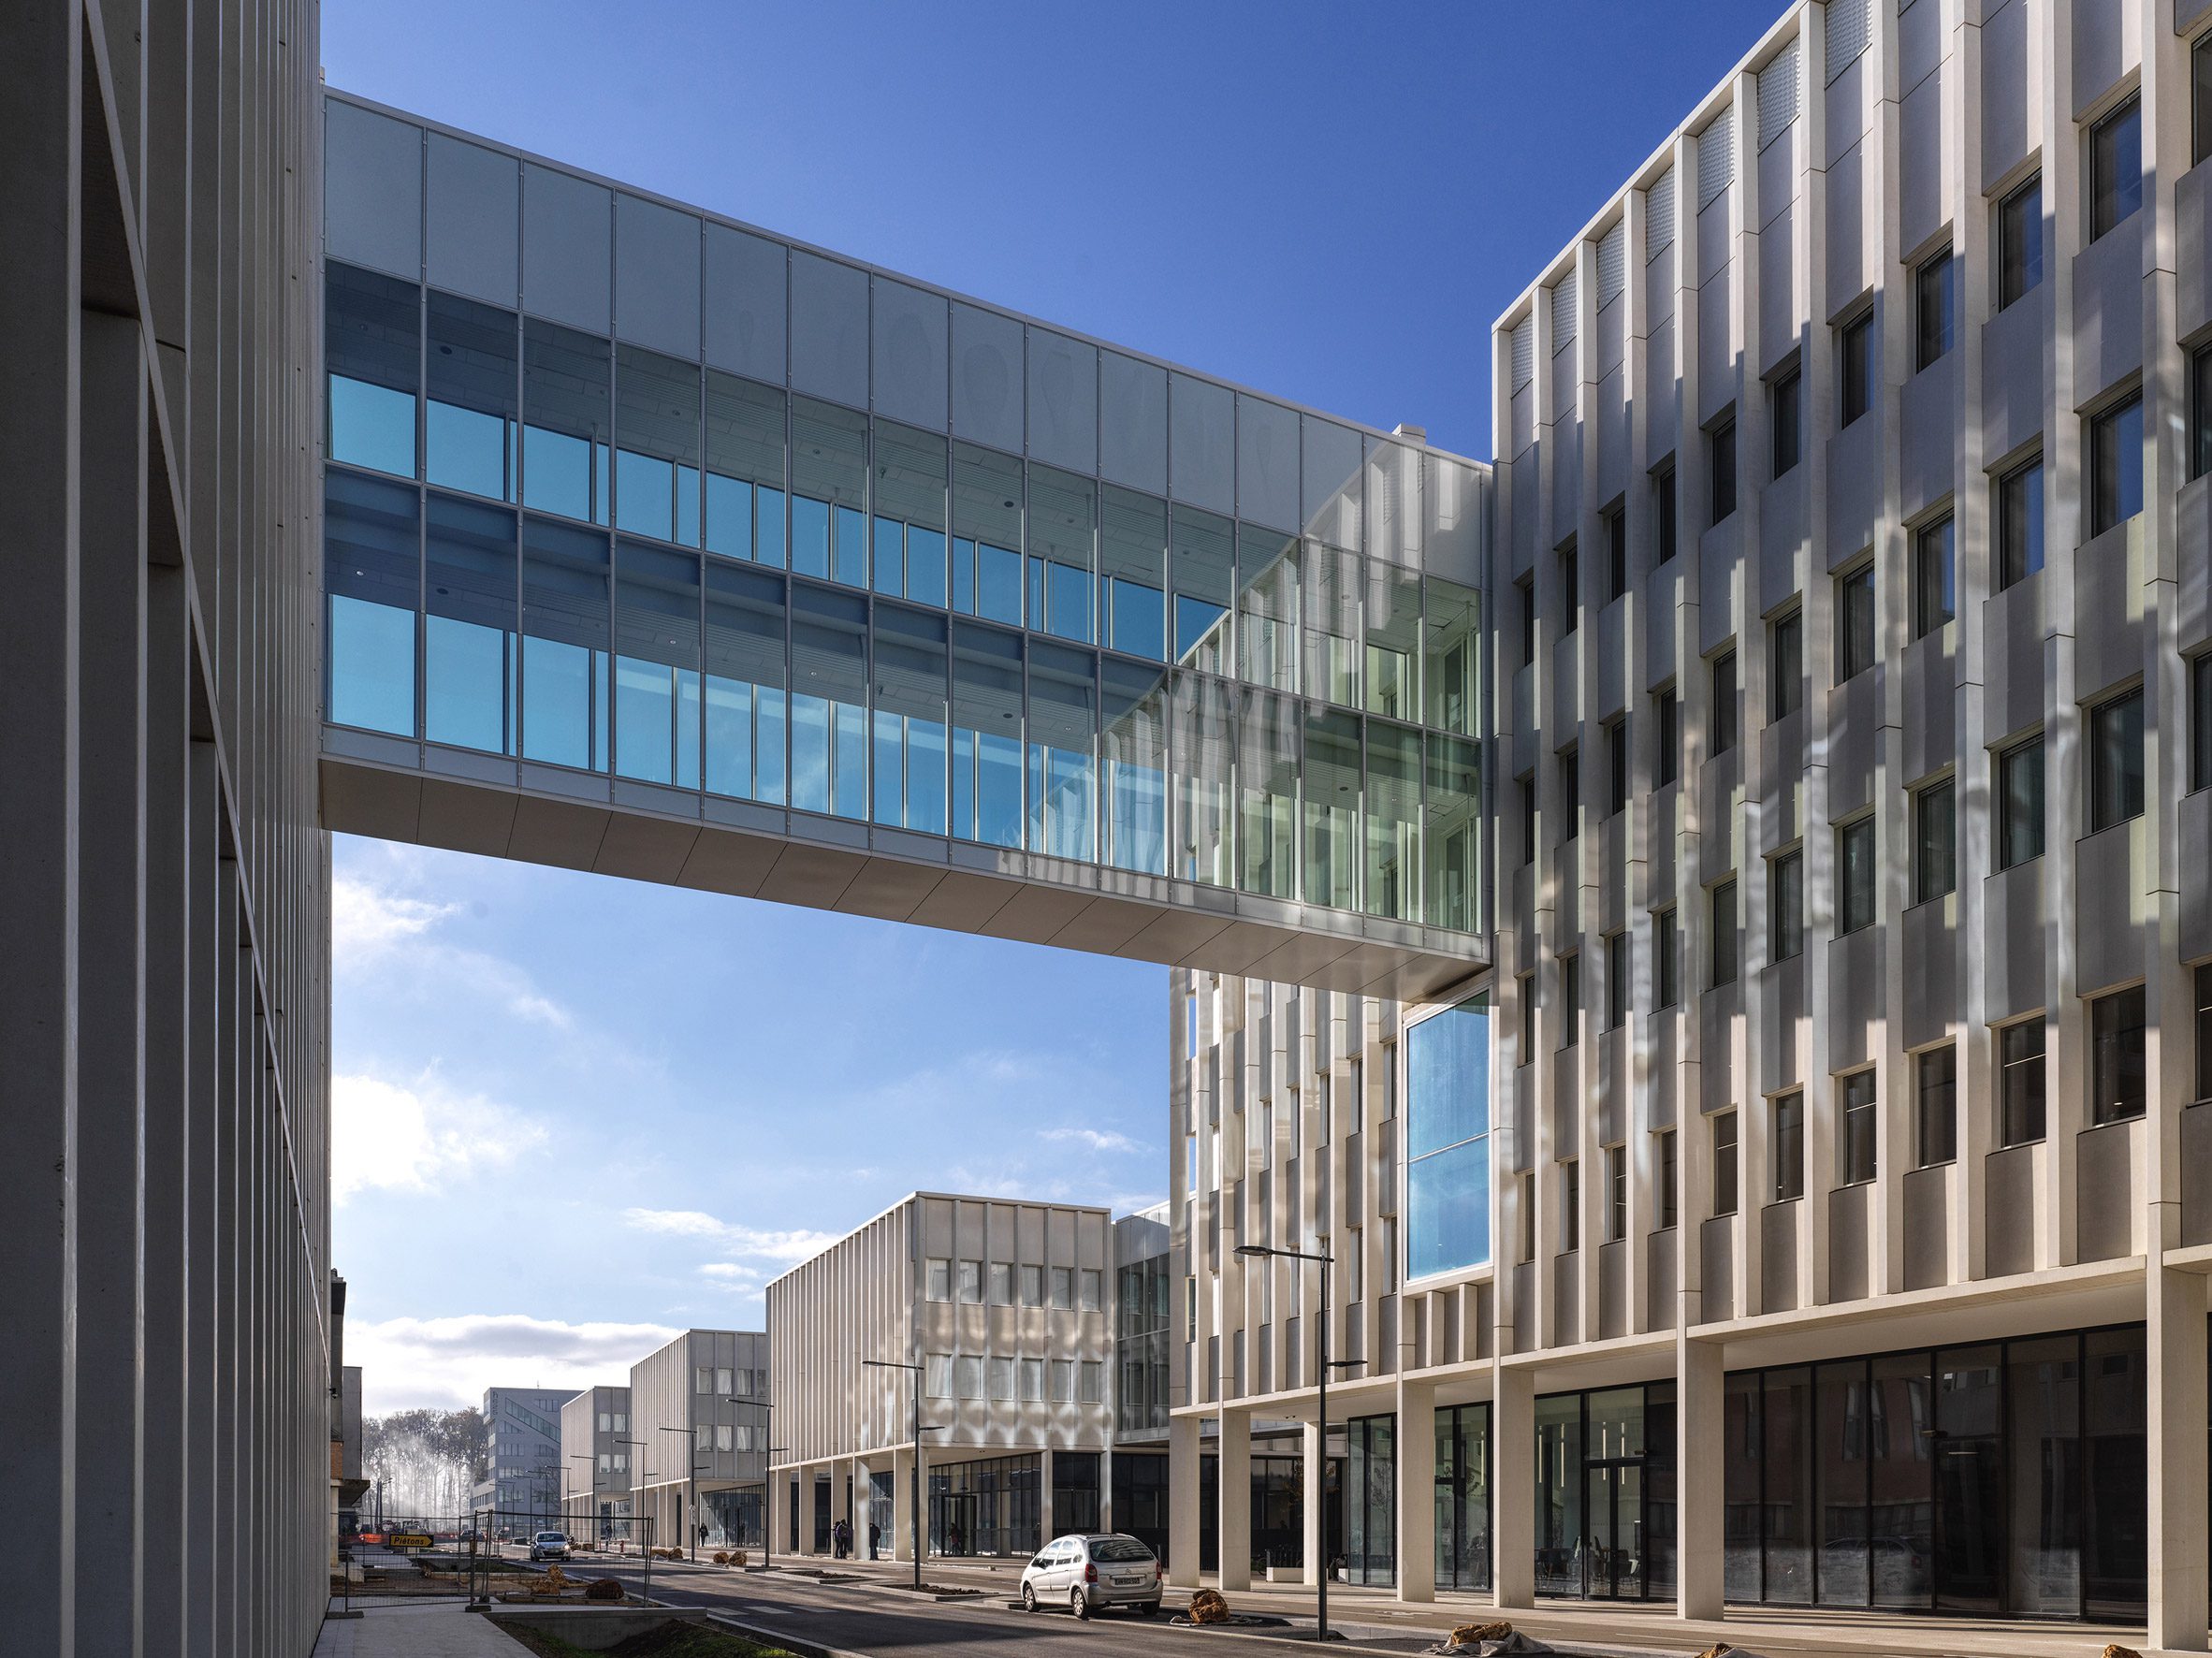 Bridges inking the Biology-Pharmacy-Chemistry Research and Education Complex in France